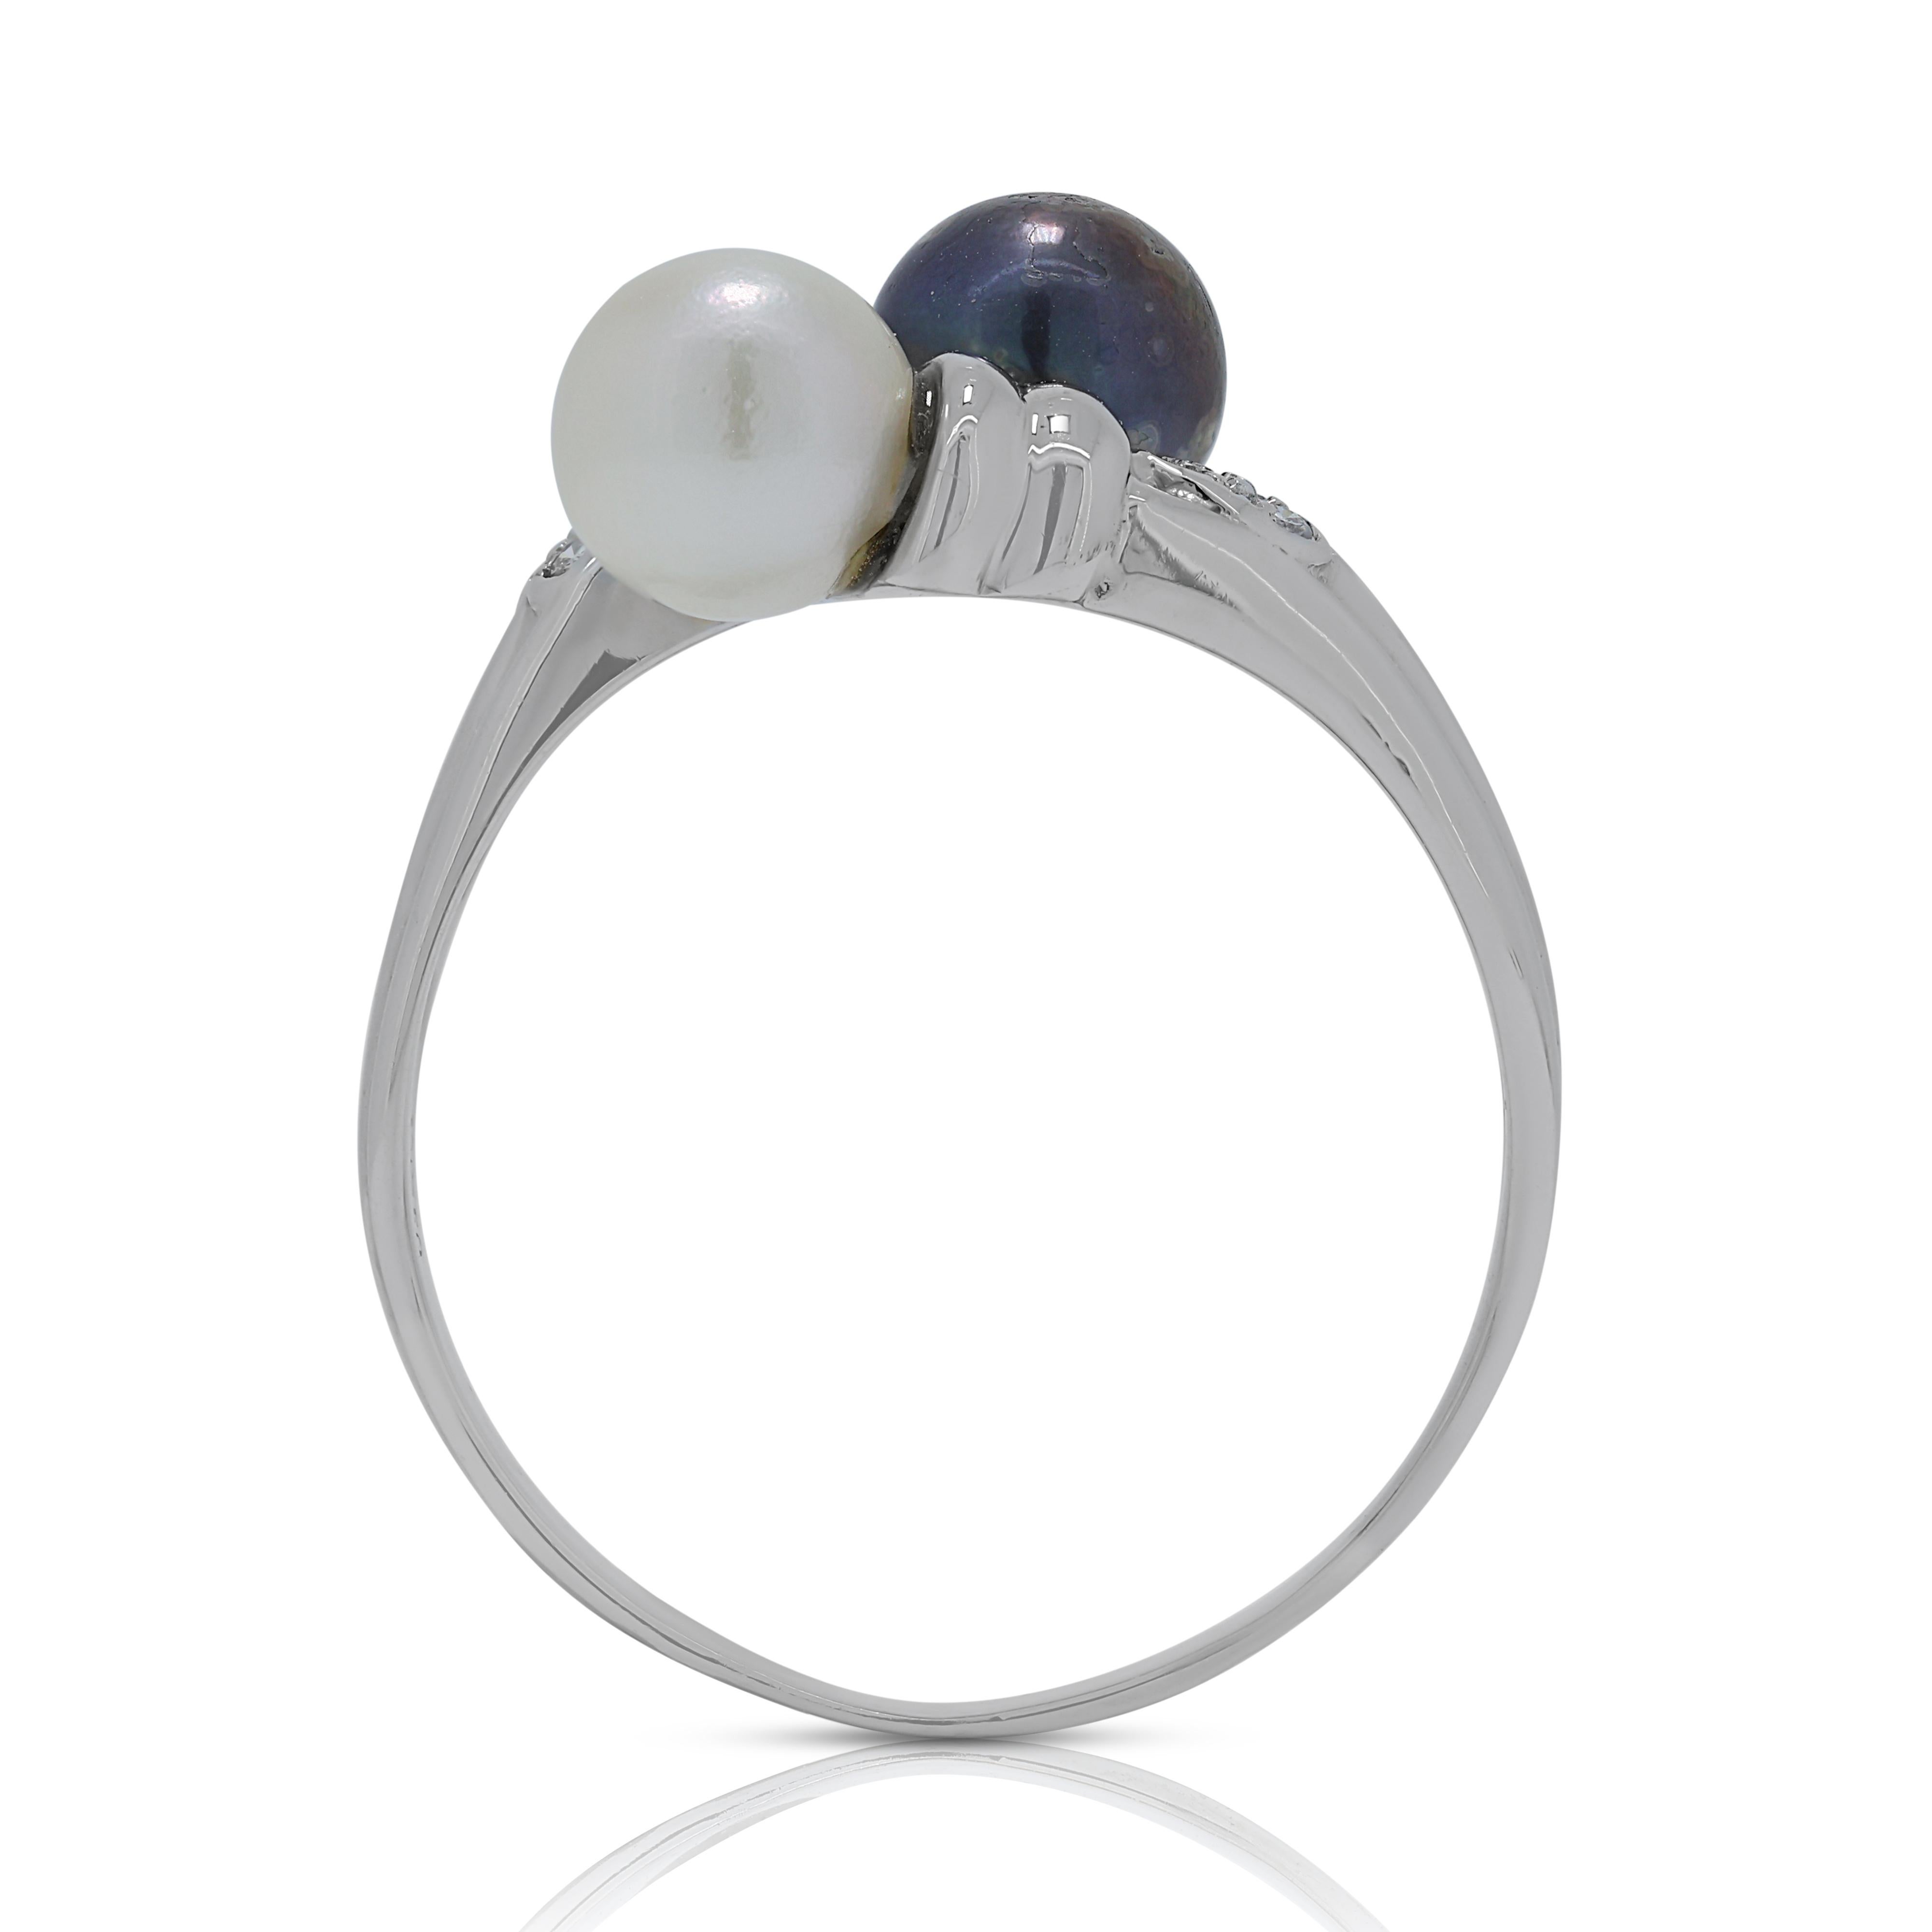  Exquisite 1.60ct Pearls Ring in 18K White Gold For Sale 1